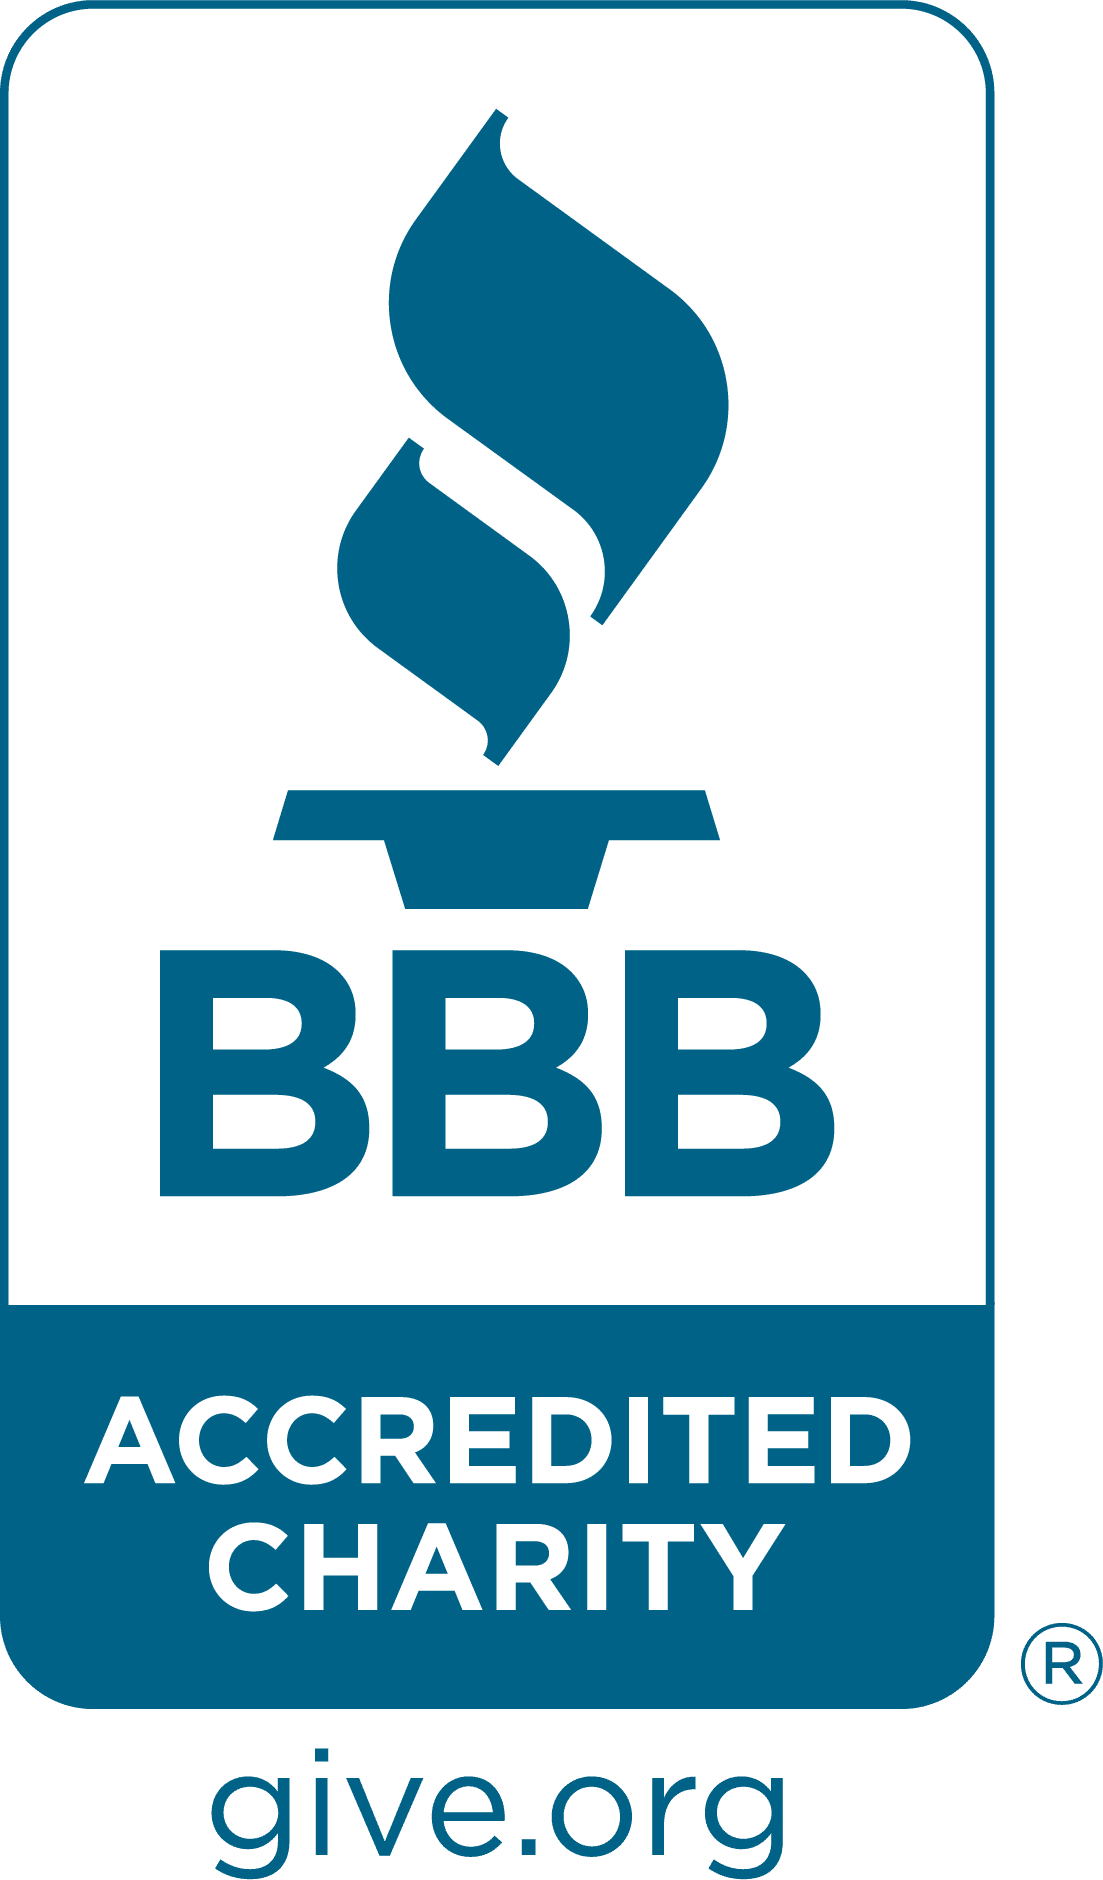 Accredited Charity BBB.org